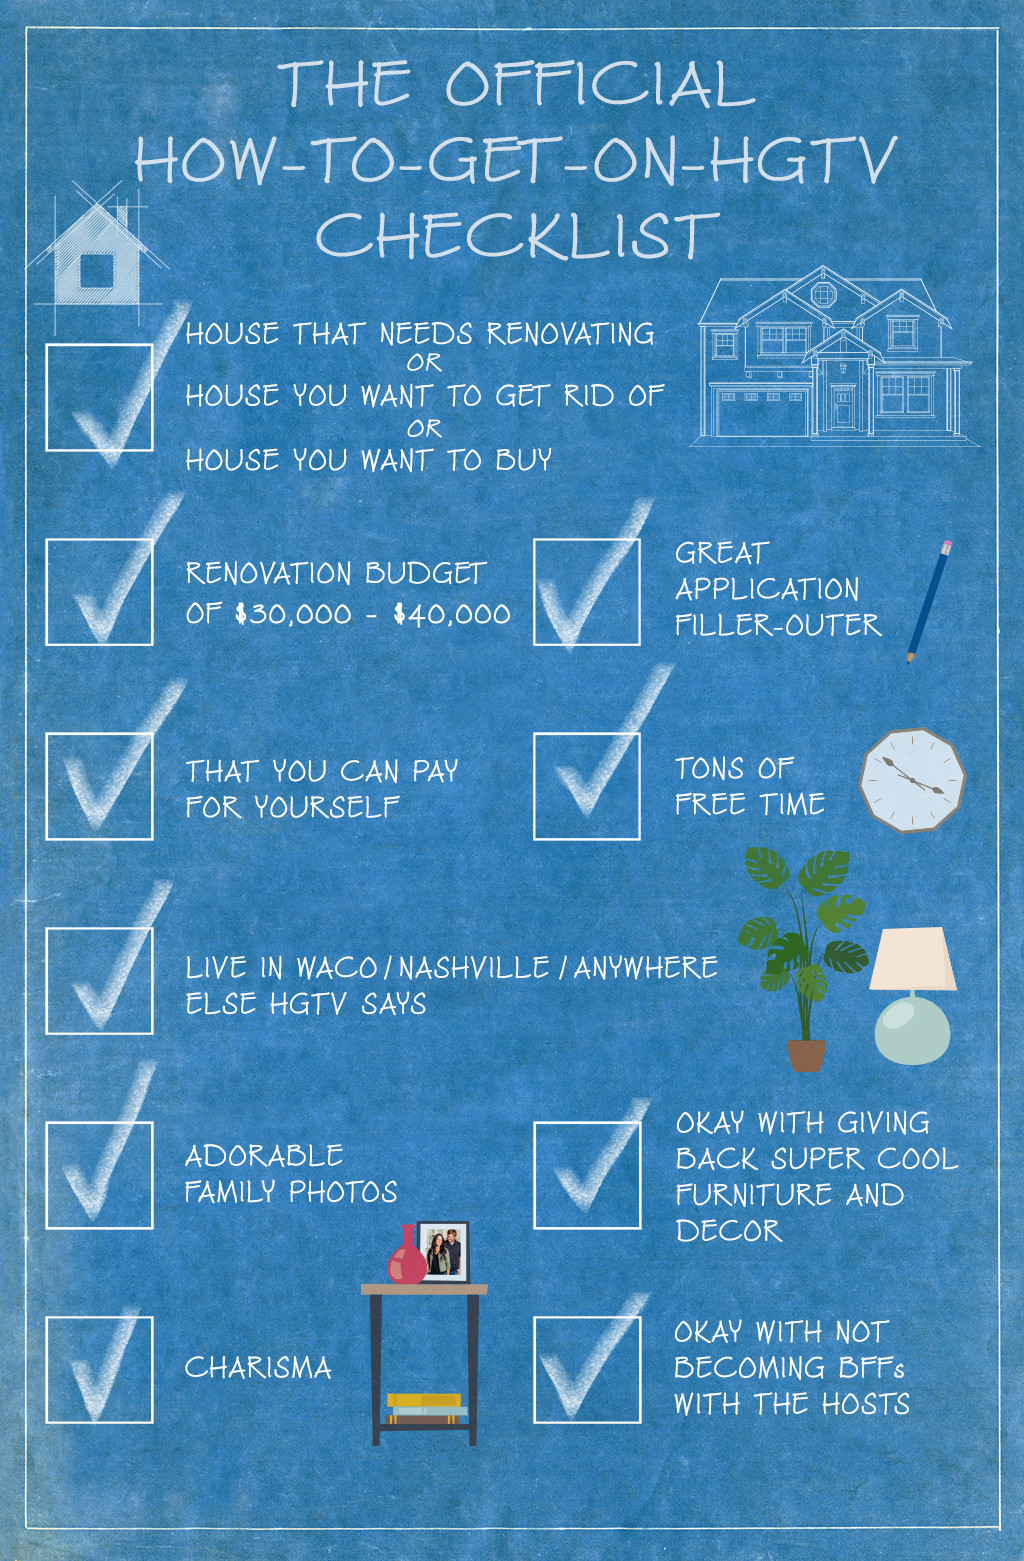 Your New Home - A Needs Versus Wants Checklist